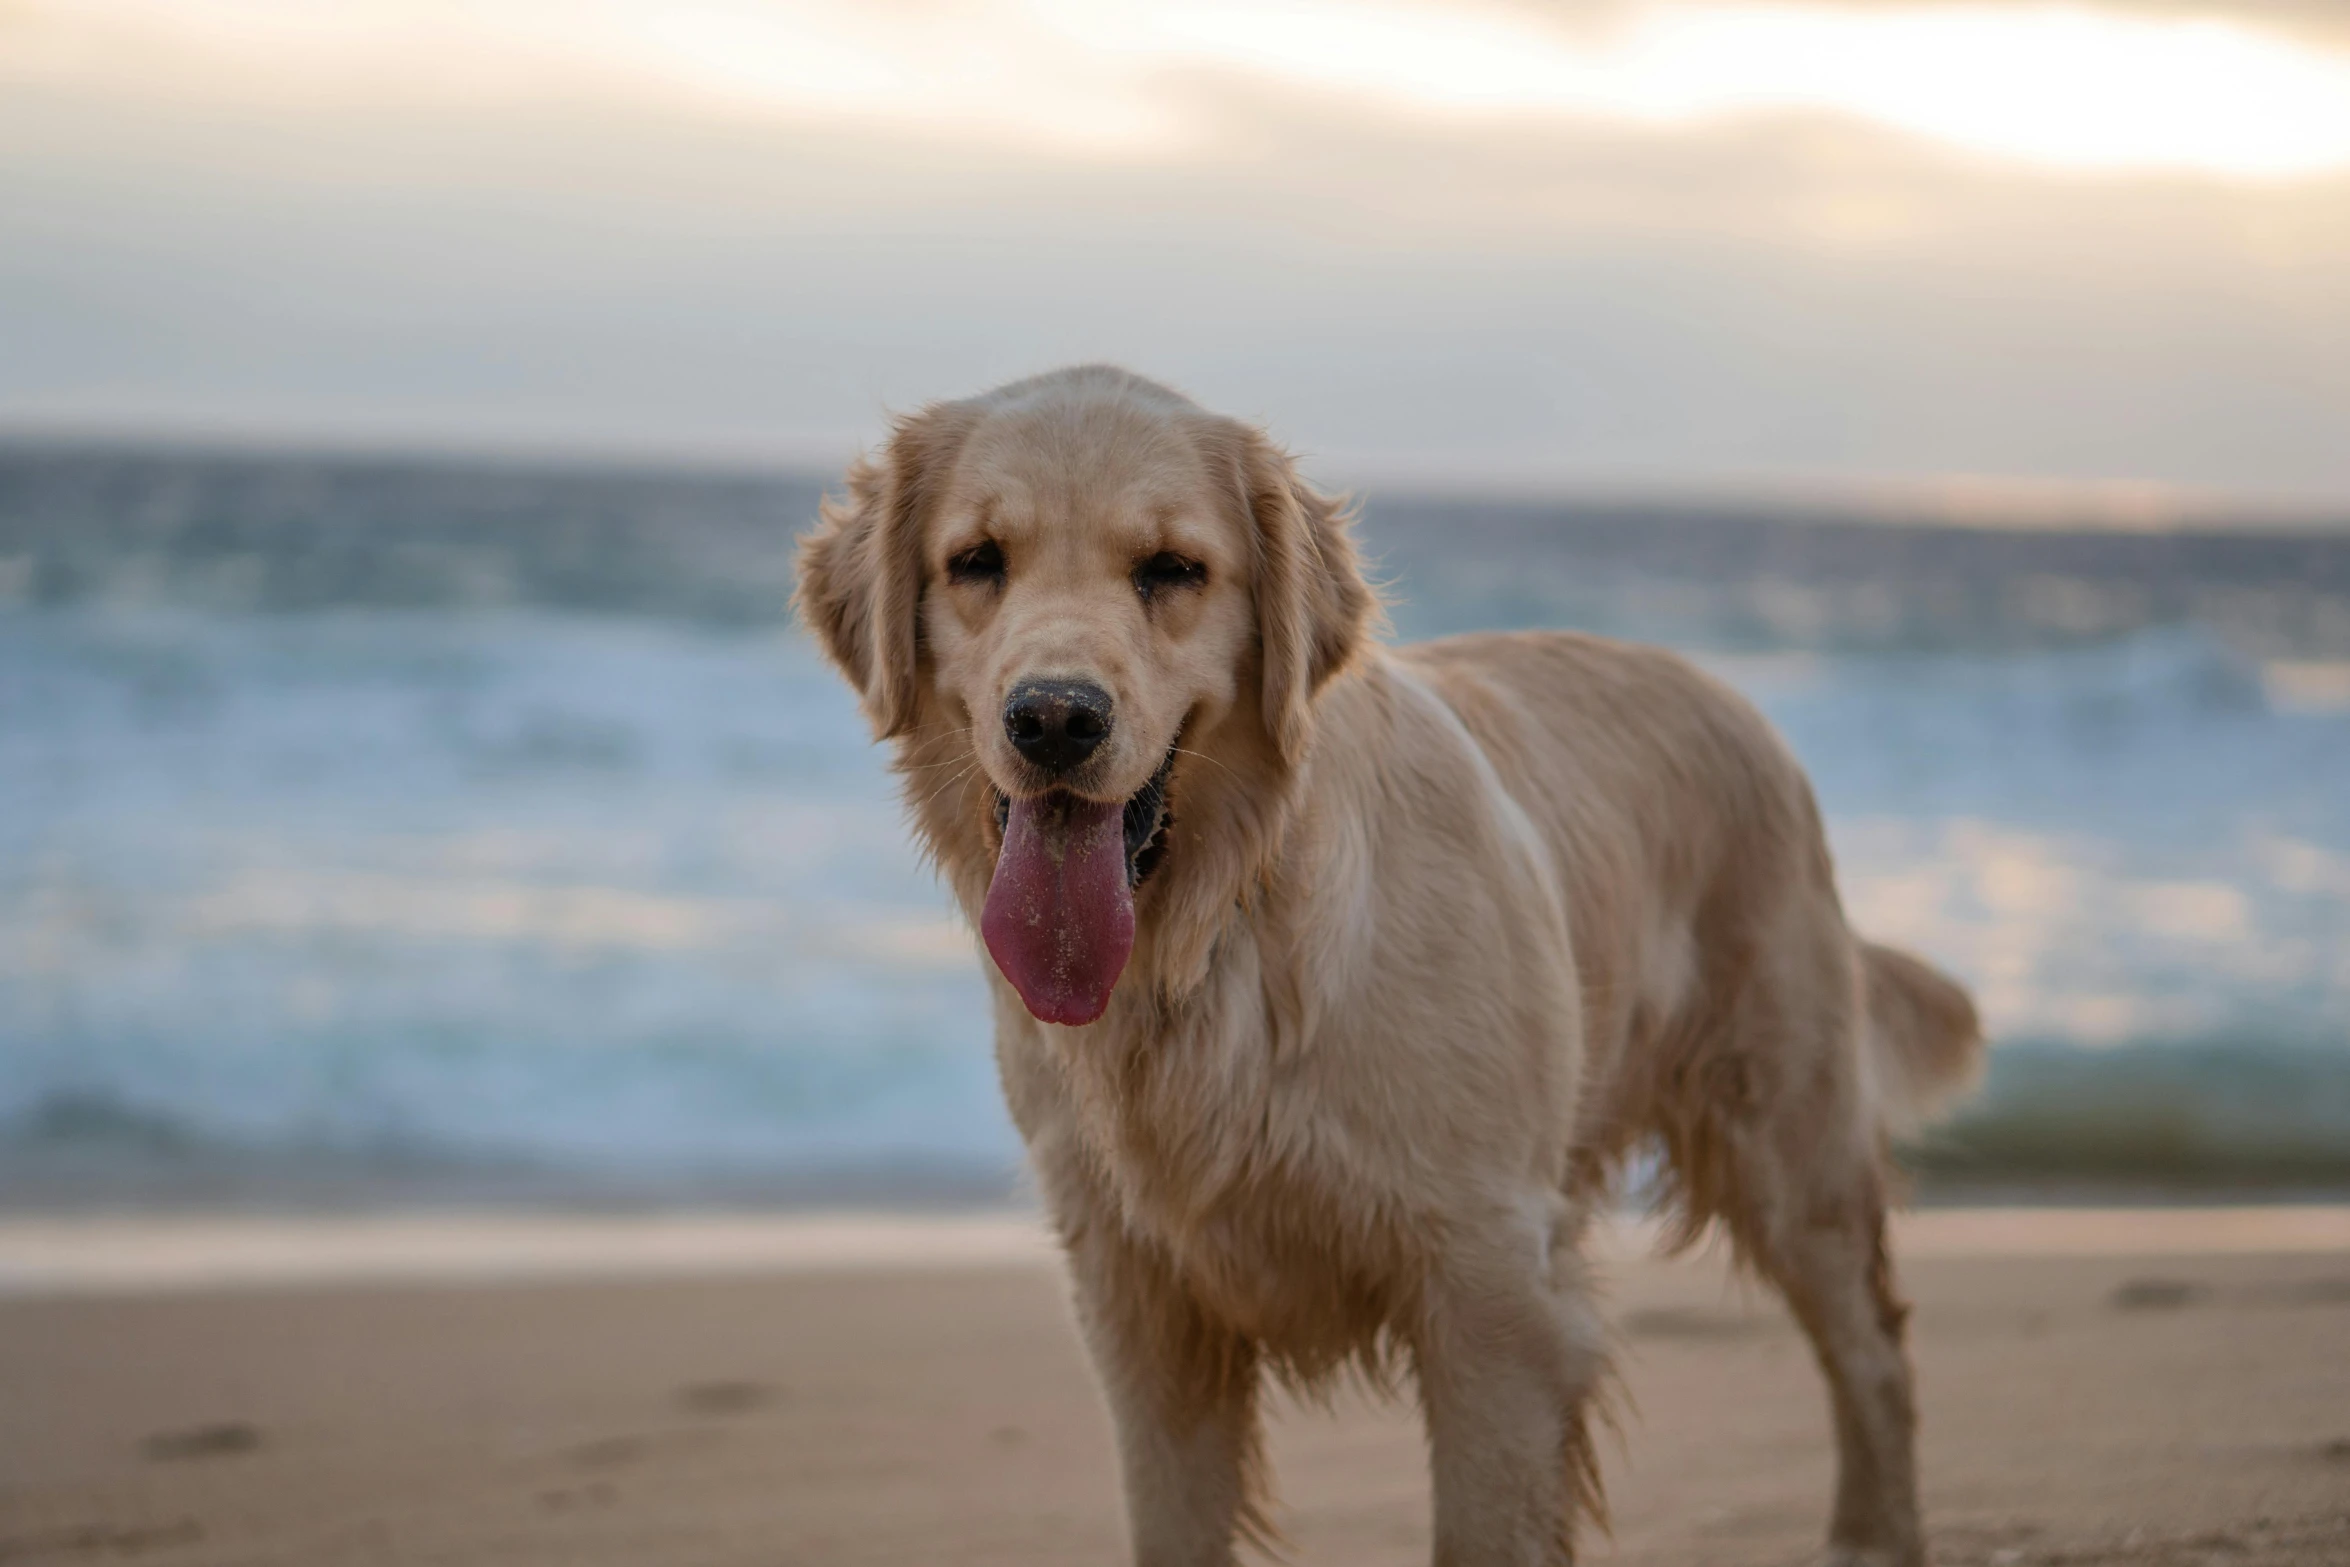 an adult golden retriever on a beach with waves crashing in the background